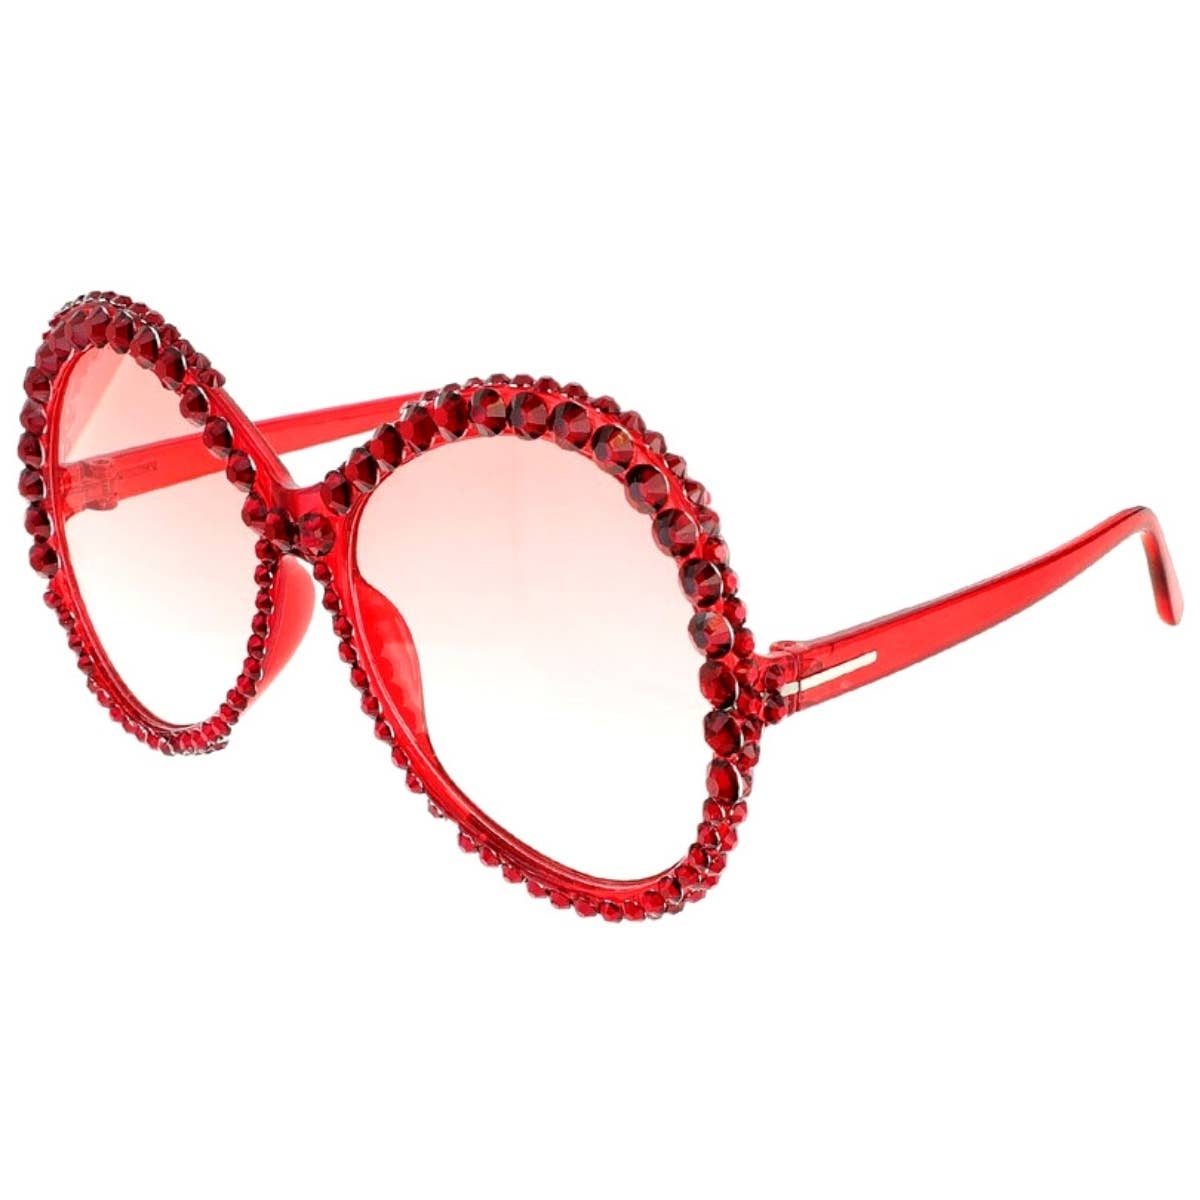 Accessories-Eyewear-Sunglasses-Red Crystal Accented Retro Sunglasses